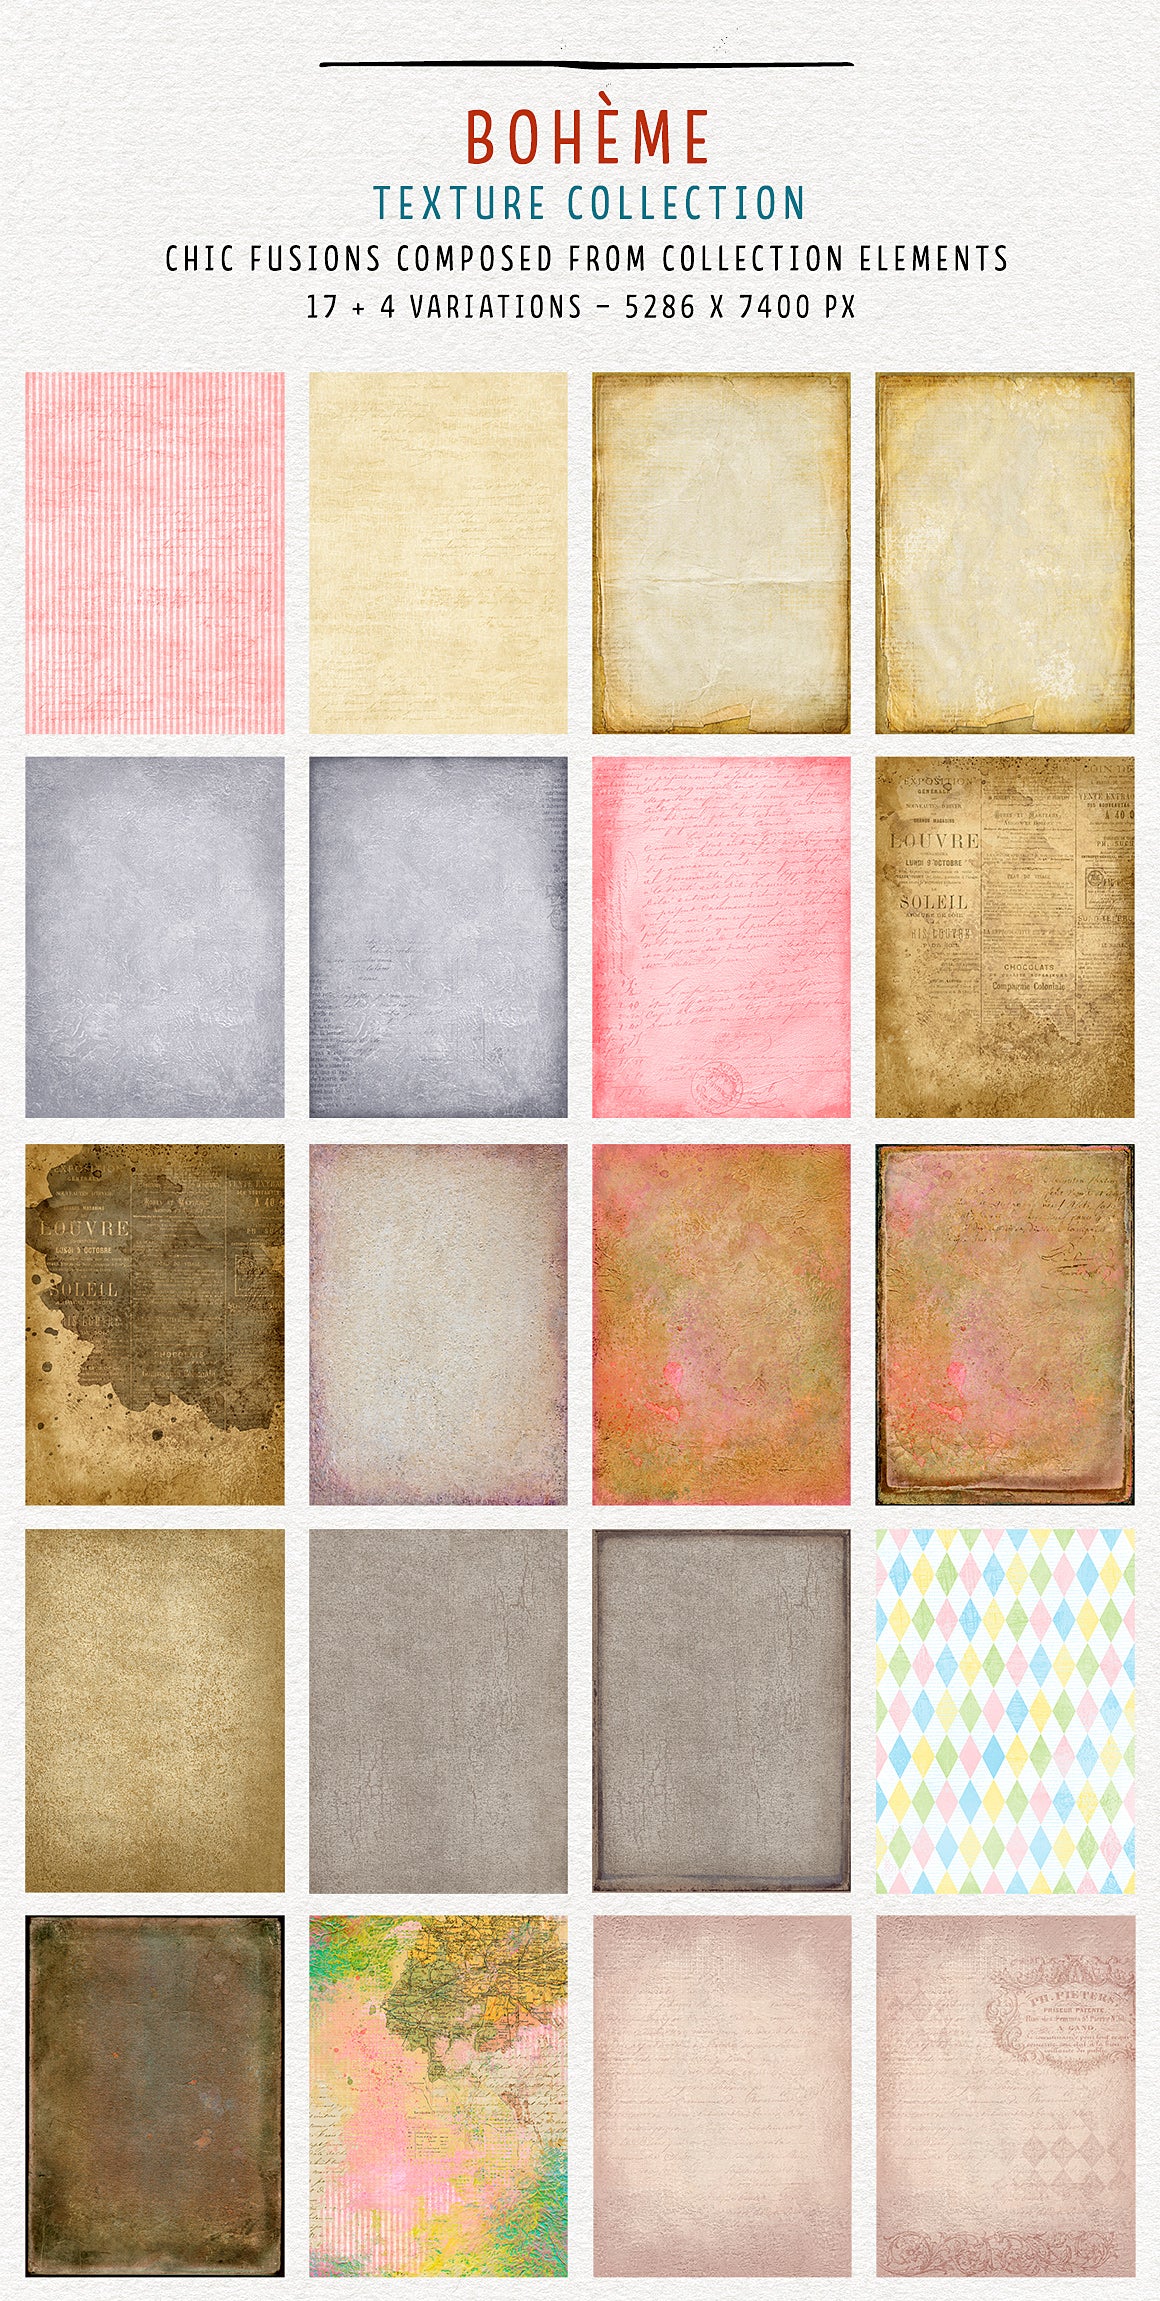 Boheme chic fusions texture collection with vintage elements. Extra-large, Extended license.